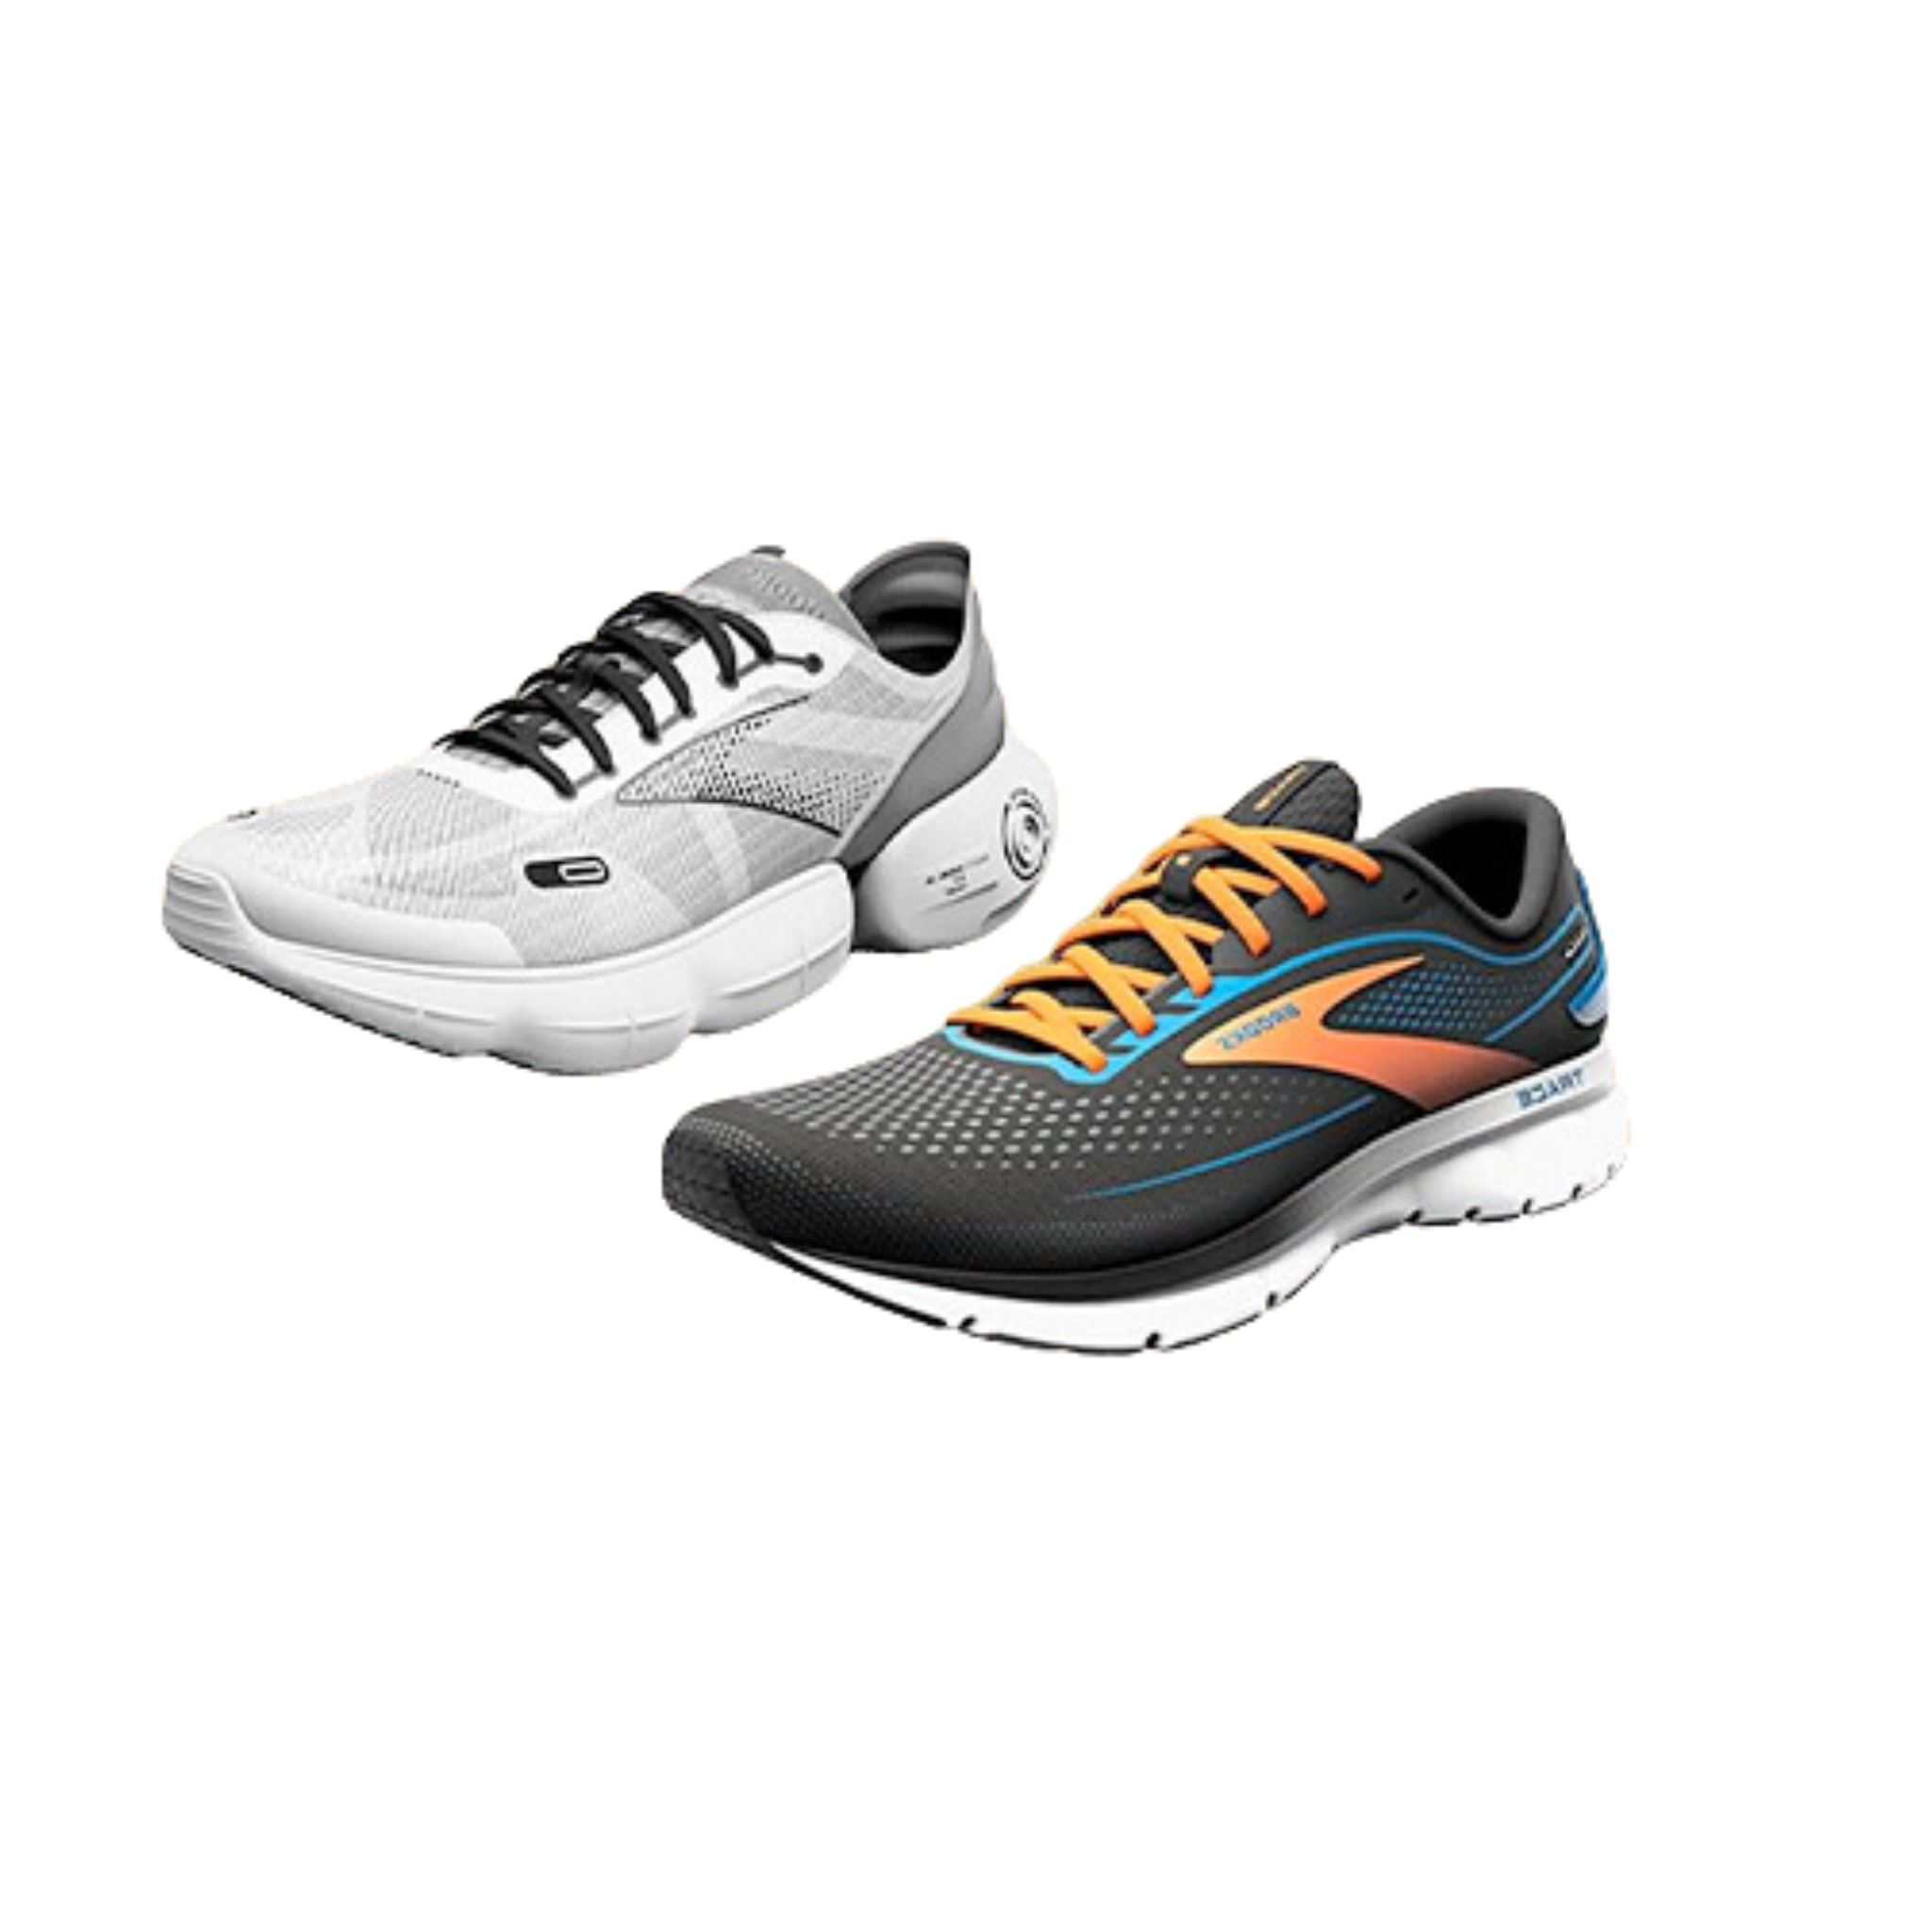 Save on Brooks Running Shoes